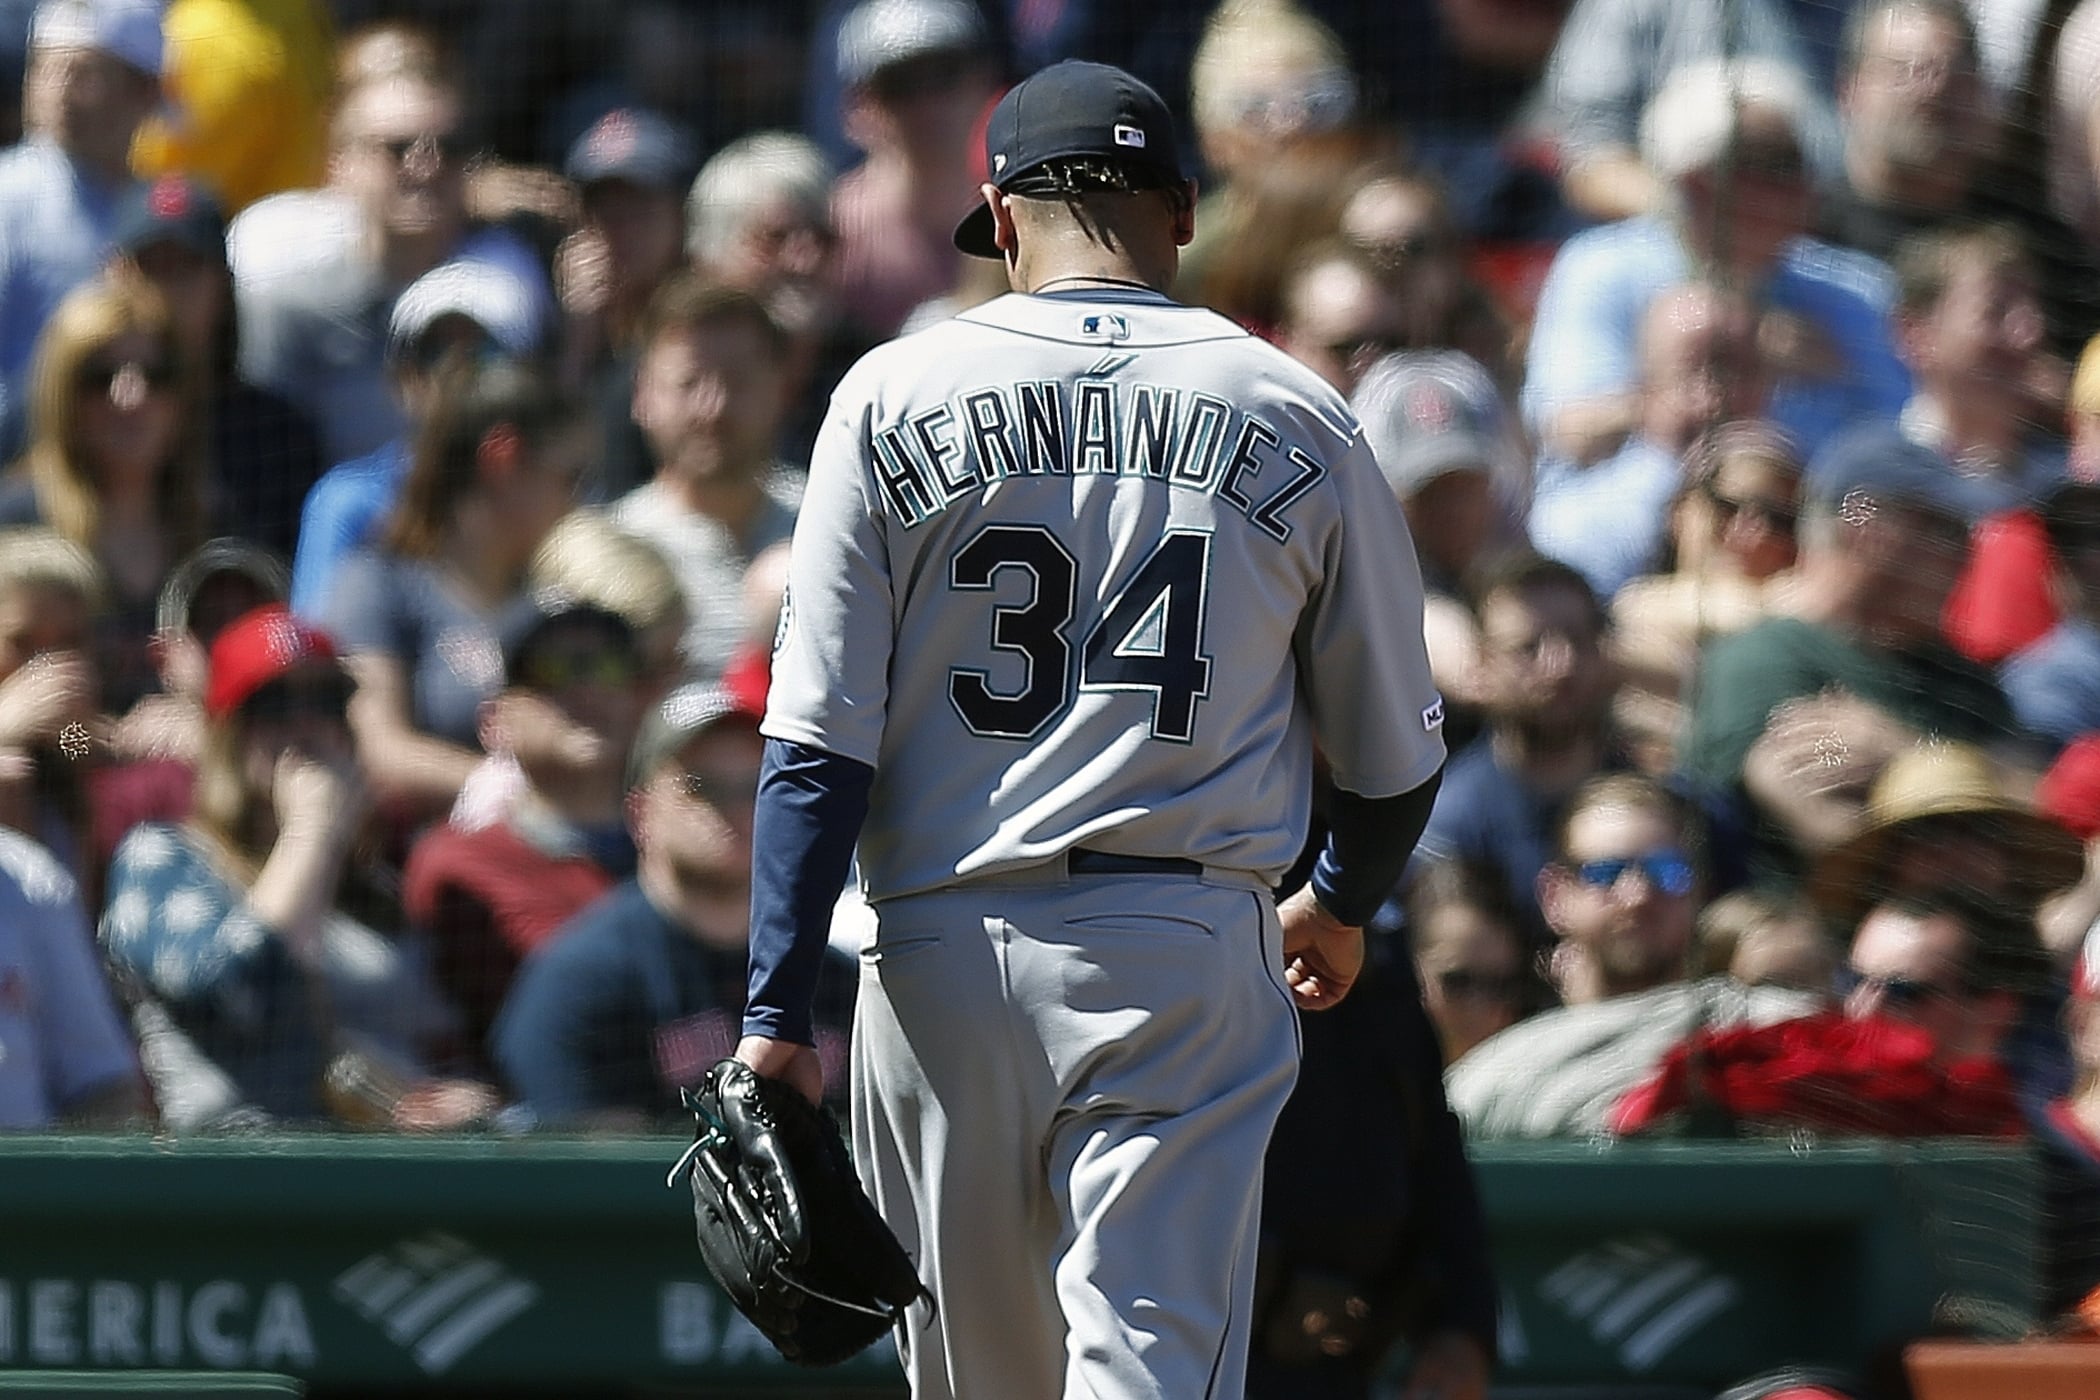 Seattle Mariners' Felix Hernandez walks off the field after being relieved during the third inning of a baseball game against the Boston Red Sox in Boston, Saturday, May 11, 2019.